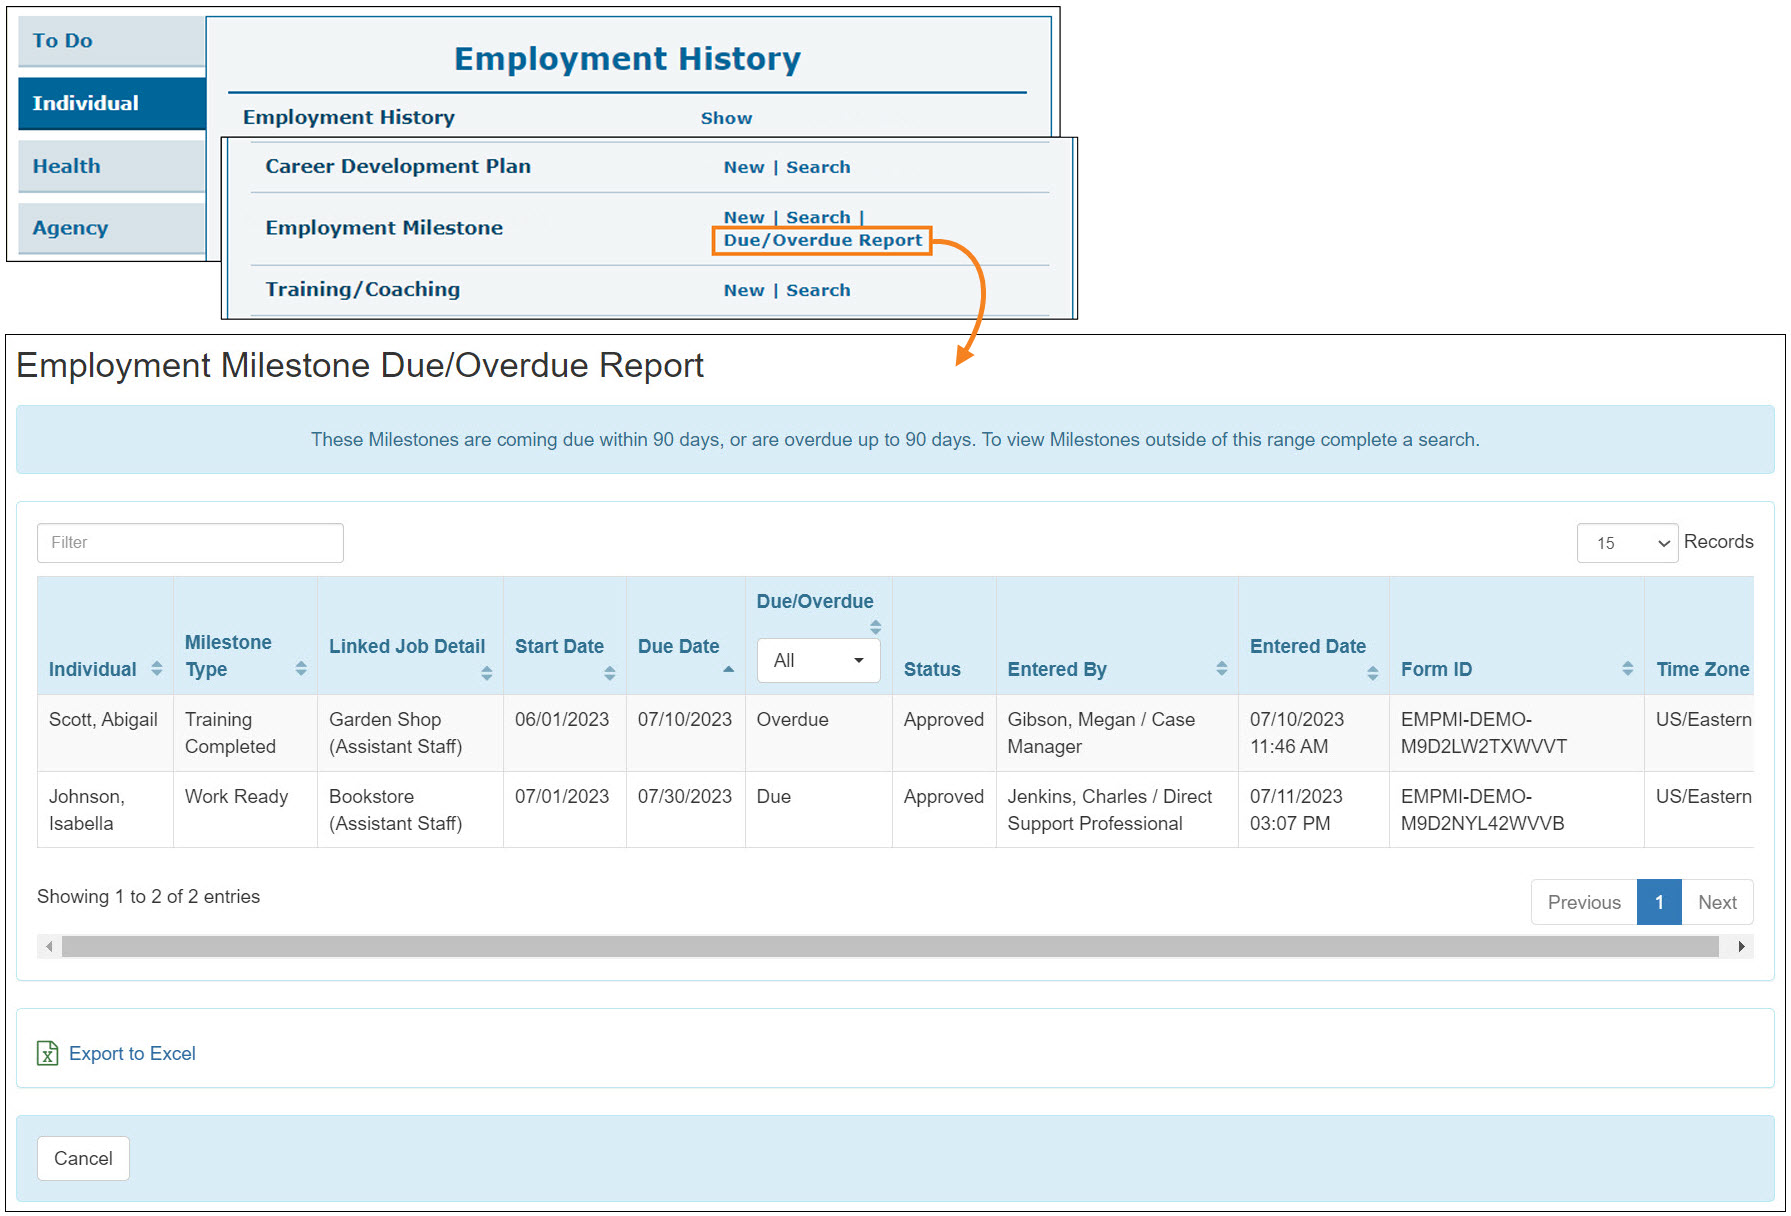 Screenshot showing the Employment Milestone Due/Overdue Report page.